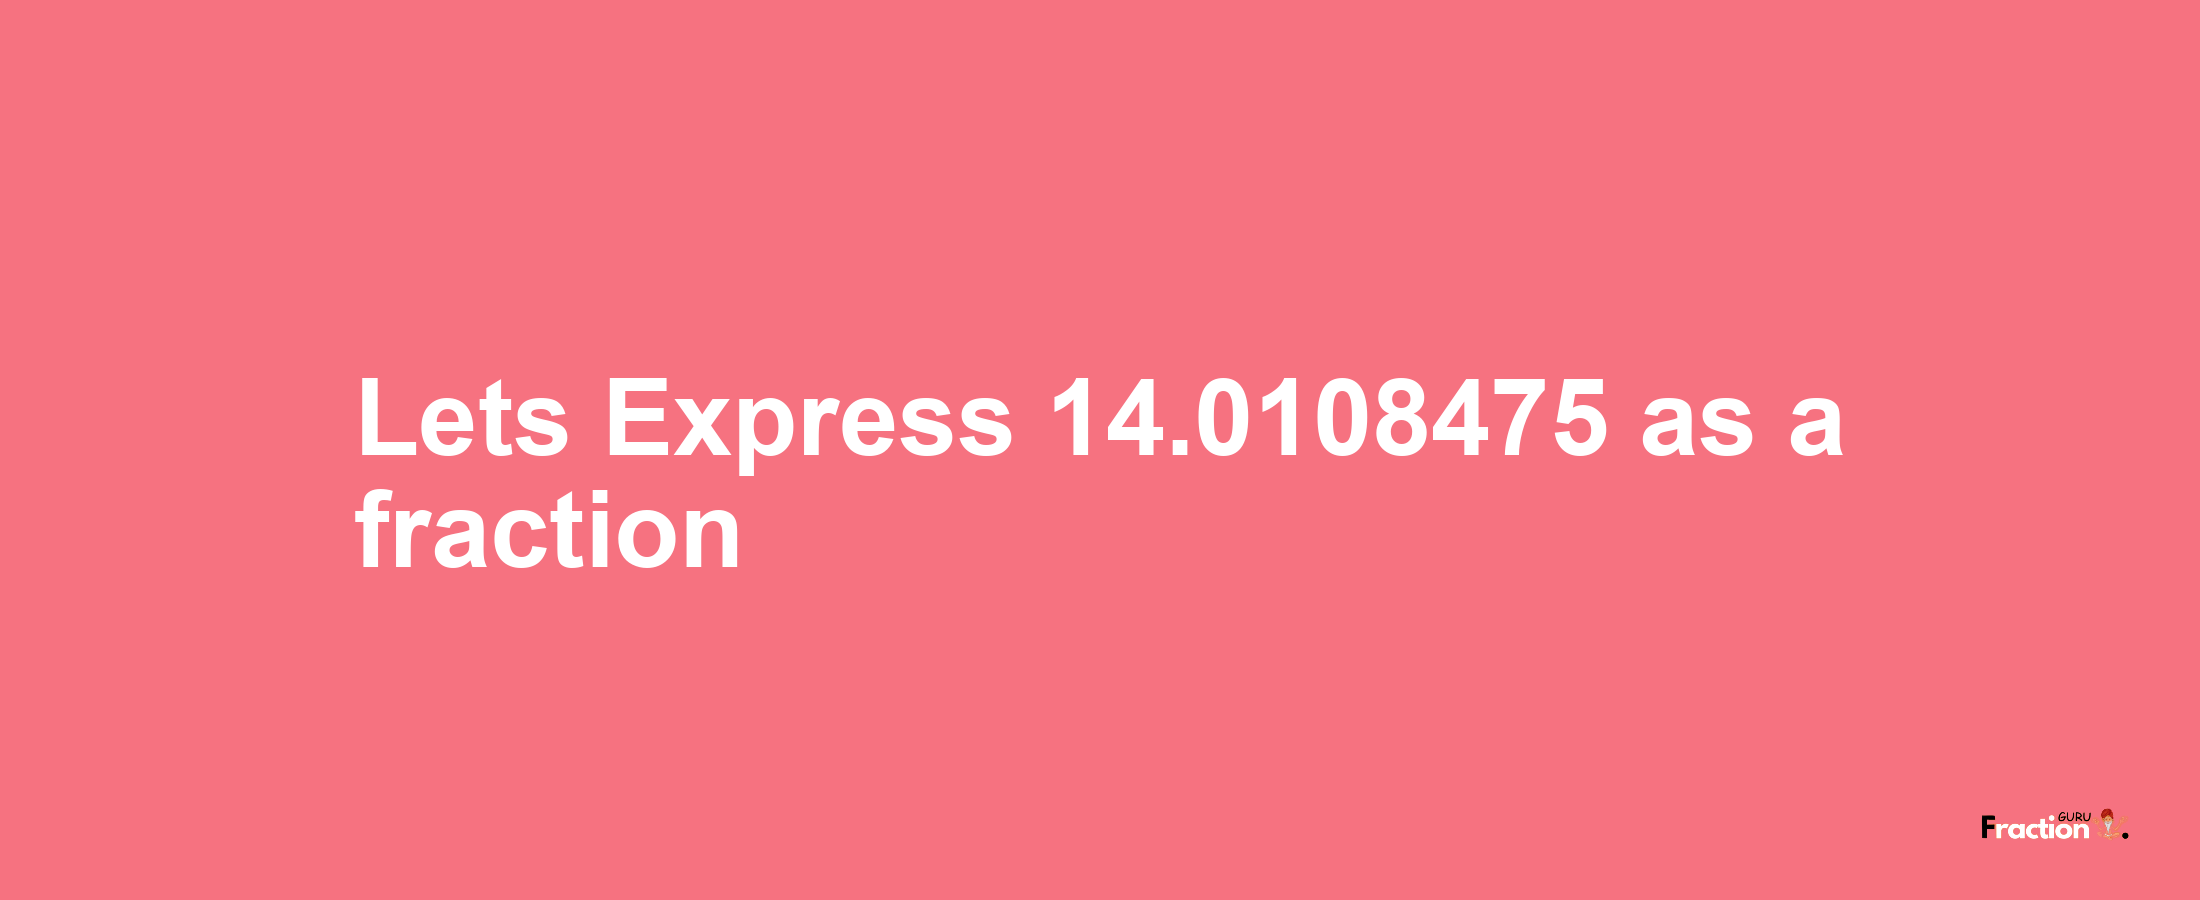 Lets Express 14.0108475 as afraction